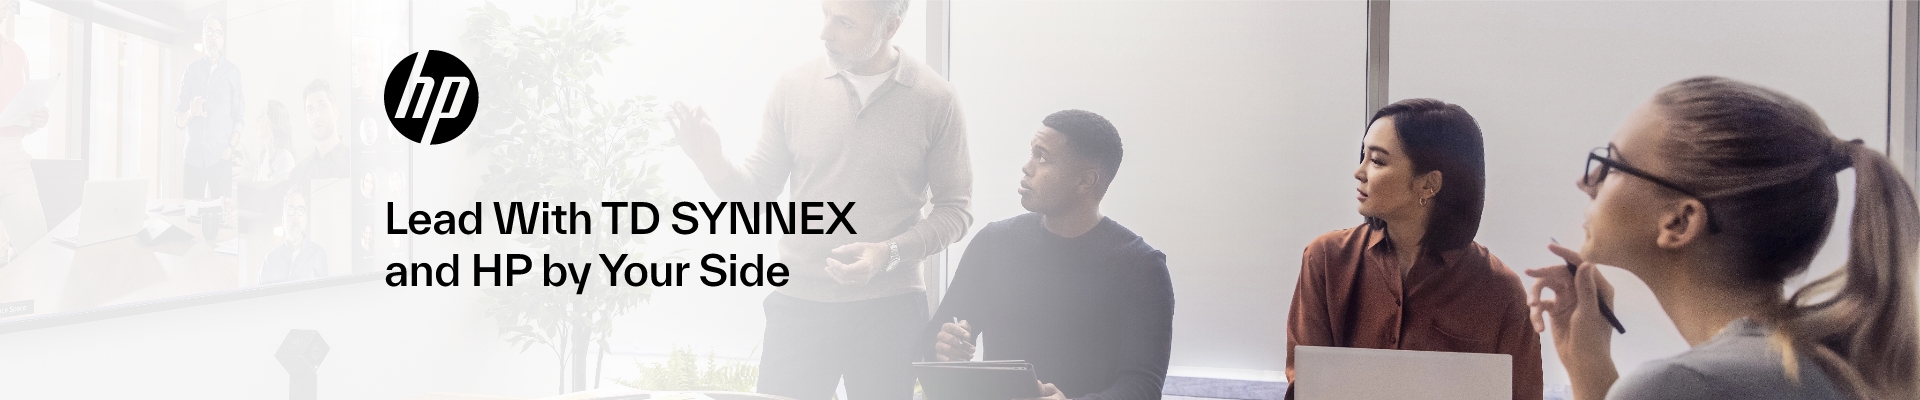 Drive Growth in HP Solutions With TD SYNNEX